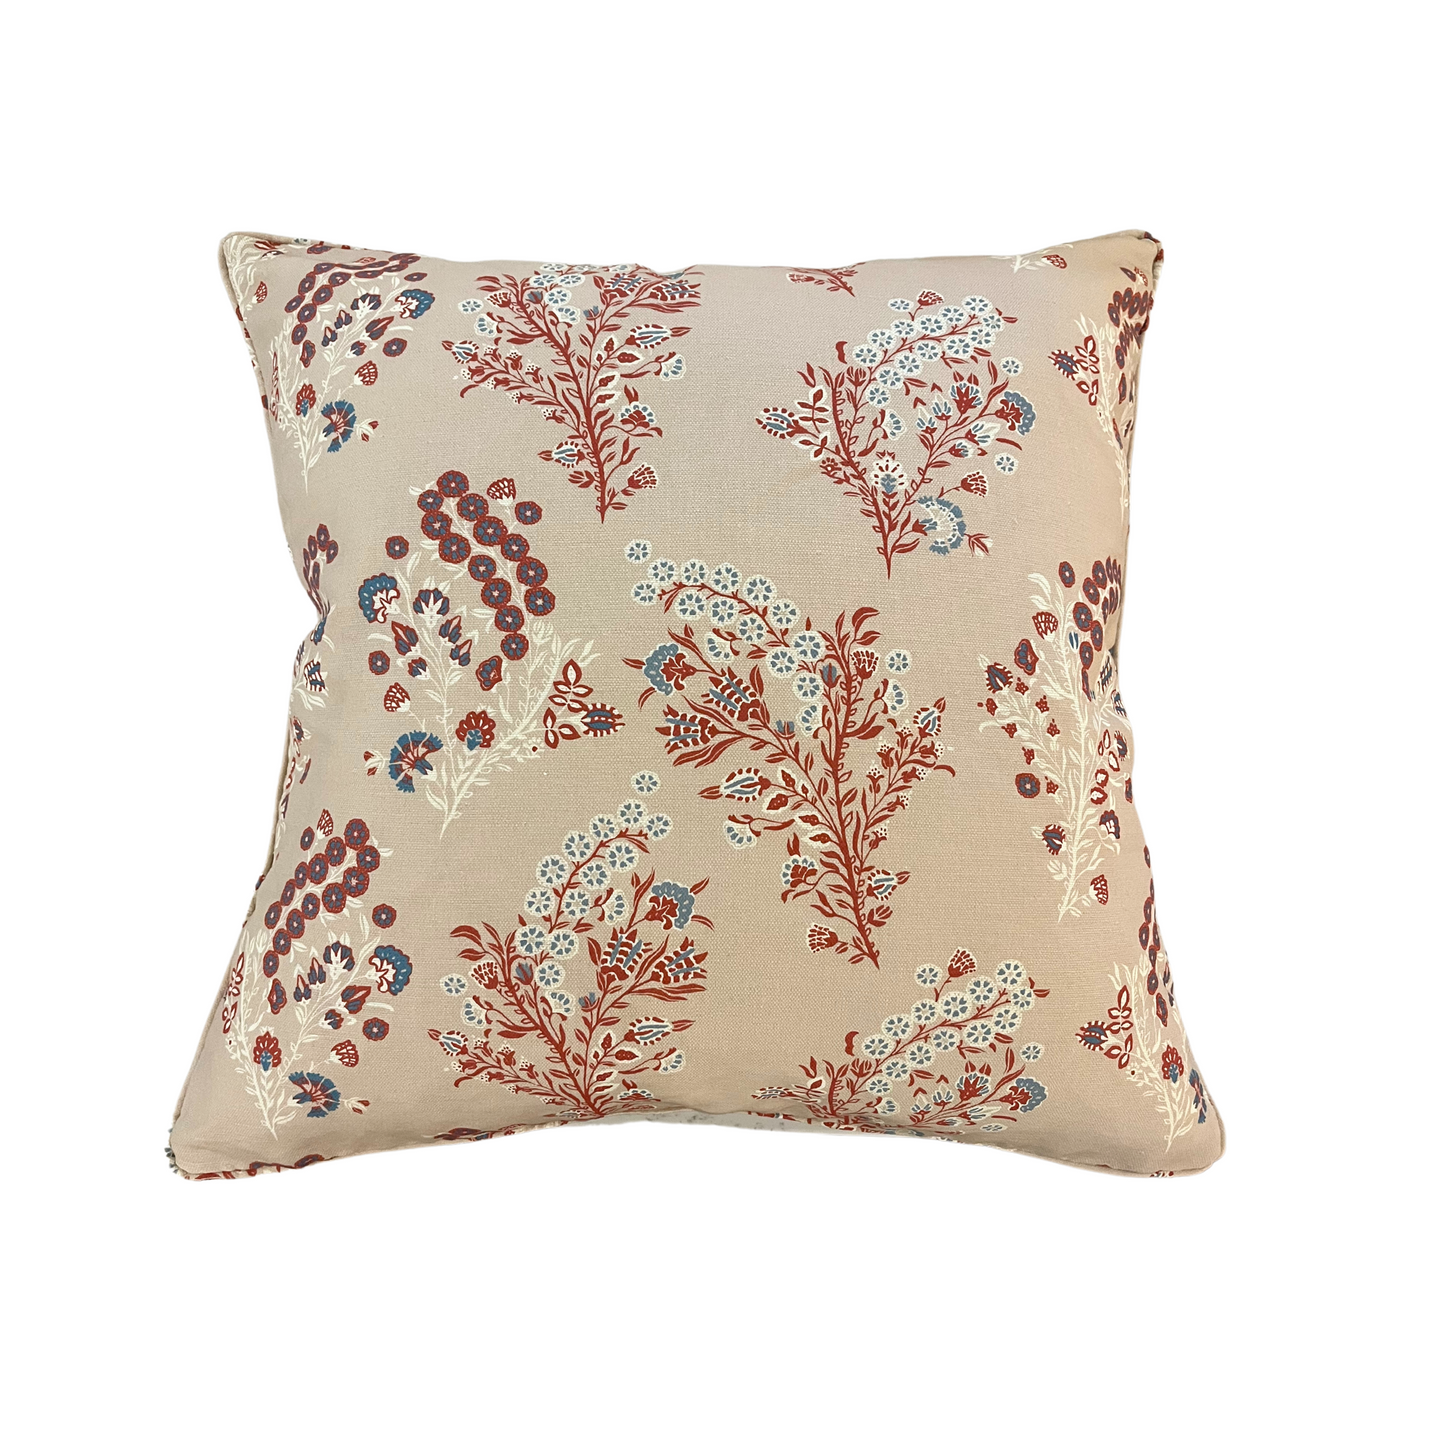 22" x 22" Pillow - Parker and Jules Coromandel Flower in Peony Pink